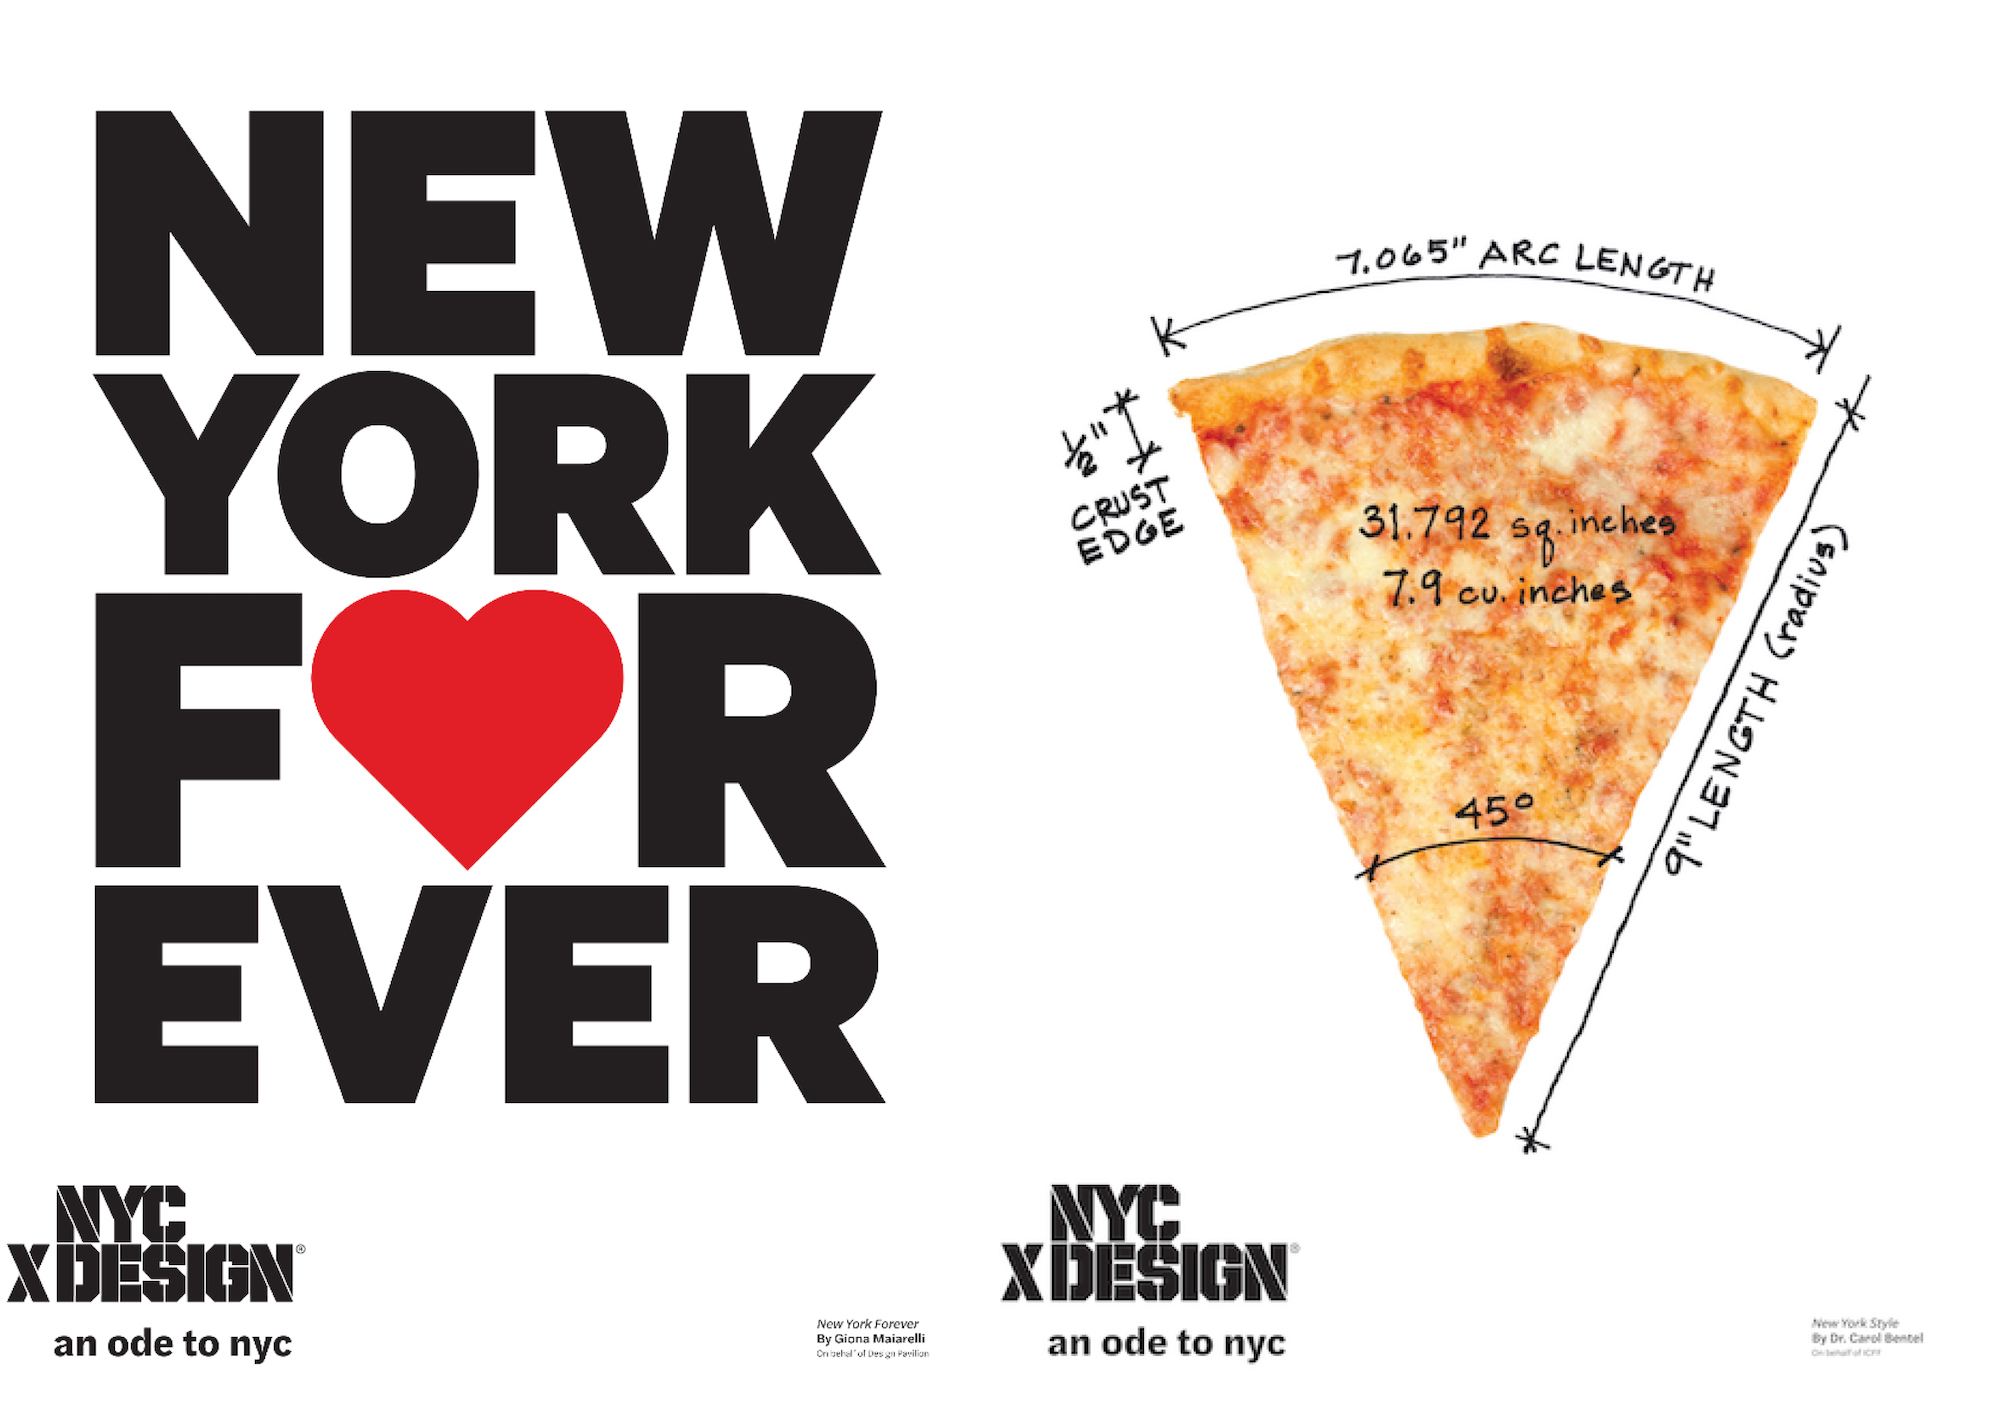 Ode to NYC' poster campaign spreads love across the five boroughs